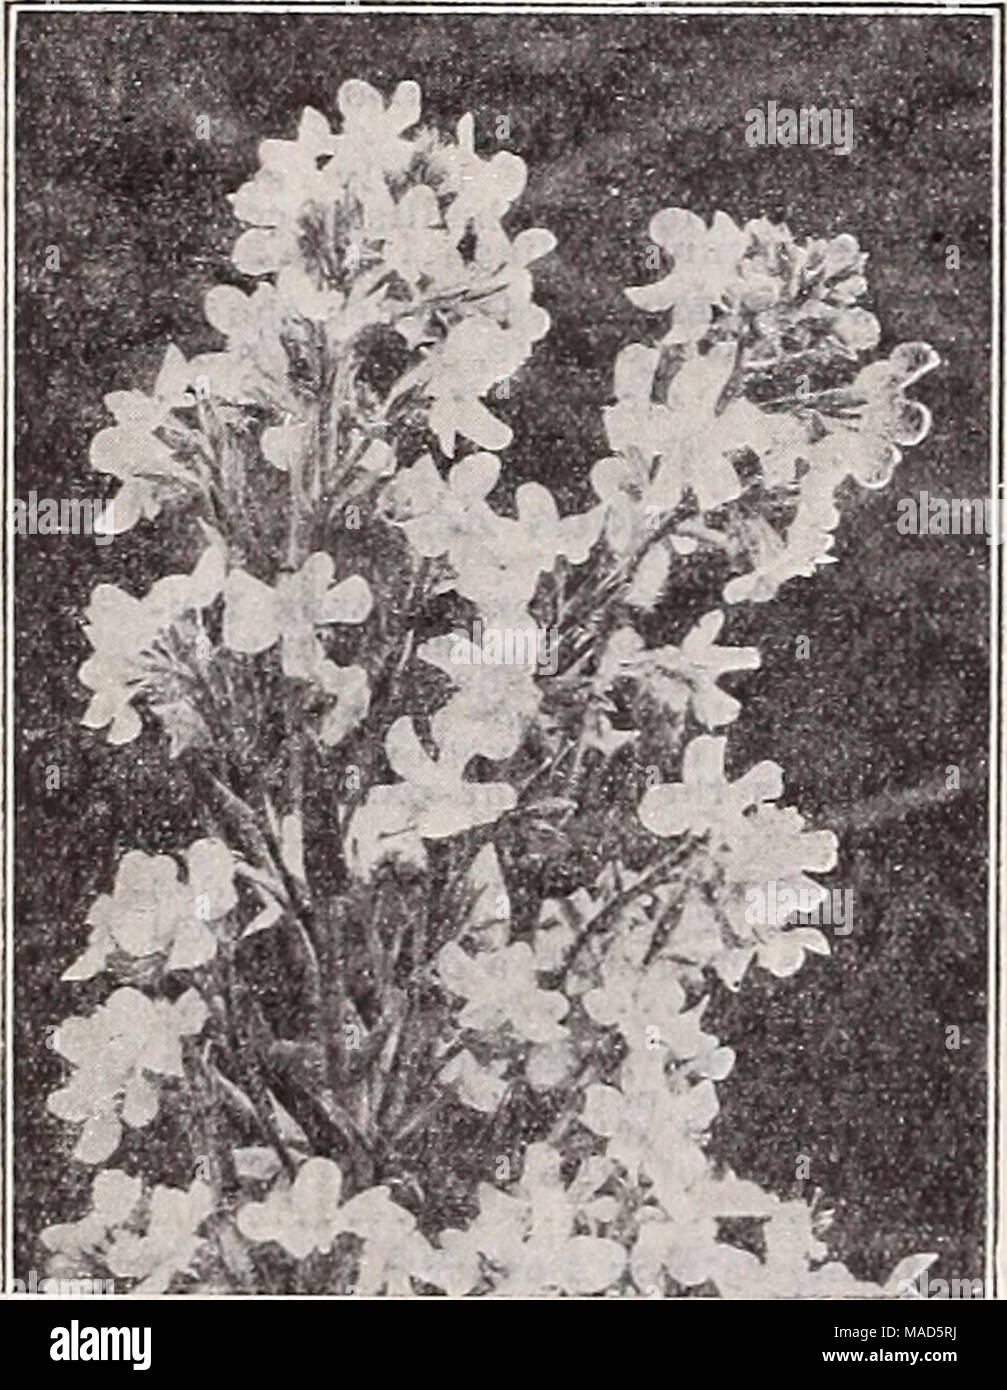 . Dreer's wholesale catalog for florists : winter spring summer 1937 . Anchusa Italica, Dropmore Variety Anchusa—Alkanet, Bugloss Italica, Dropmore Variety. Grows 3 to 5 feet high. Bears during May and June In abundance flowers of the richest Gentian blue. Trade pkt. 15c; oz. 60c; y* lb. $2.00. Italica Iiissadell. An Improved form of the Dropmore variety. Of strong, vigorous growth, about 5 feet high. Showy sprays of extra larsre, clear Gentian blue flowers. Trade pkt. 15c; oz. 60c; V4, lb. $2.00. Anchusa myosotidiflora A distinct dwarf species, 10 Inches high, pro- ducing during April and May Stock Photo